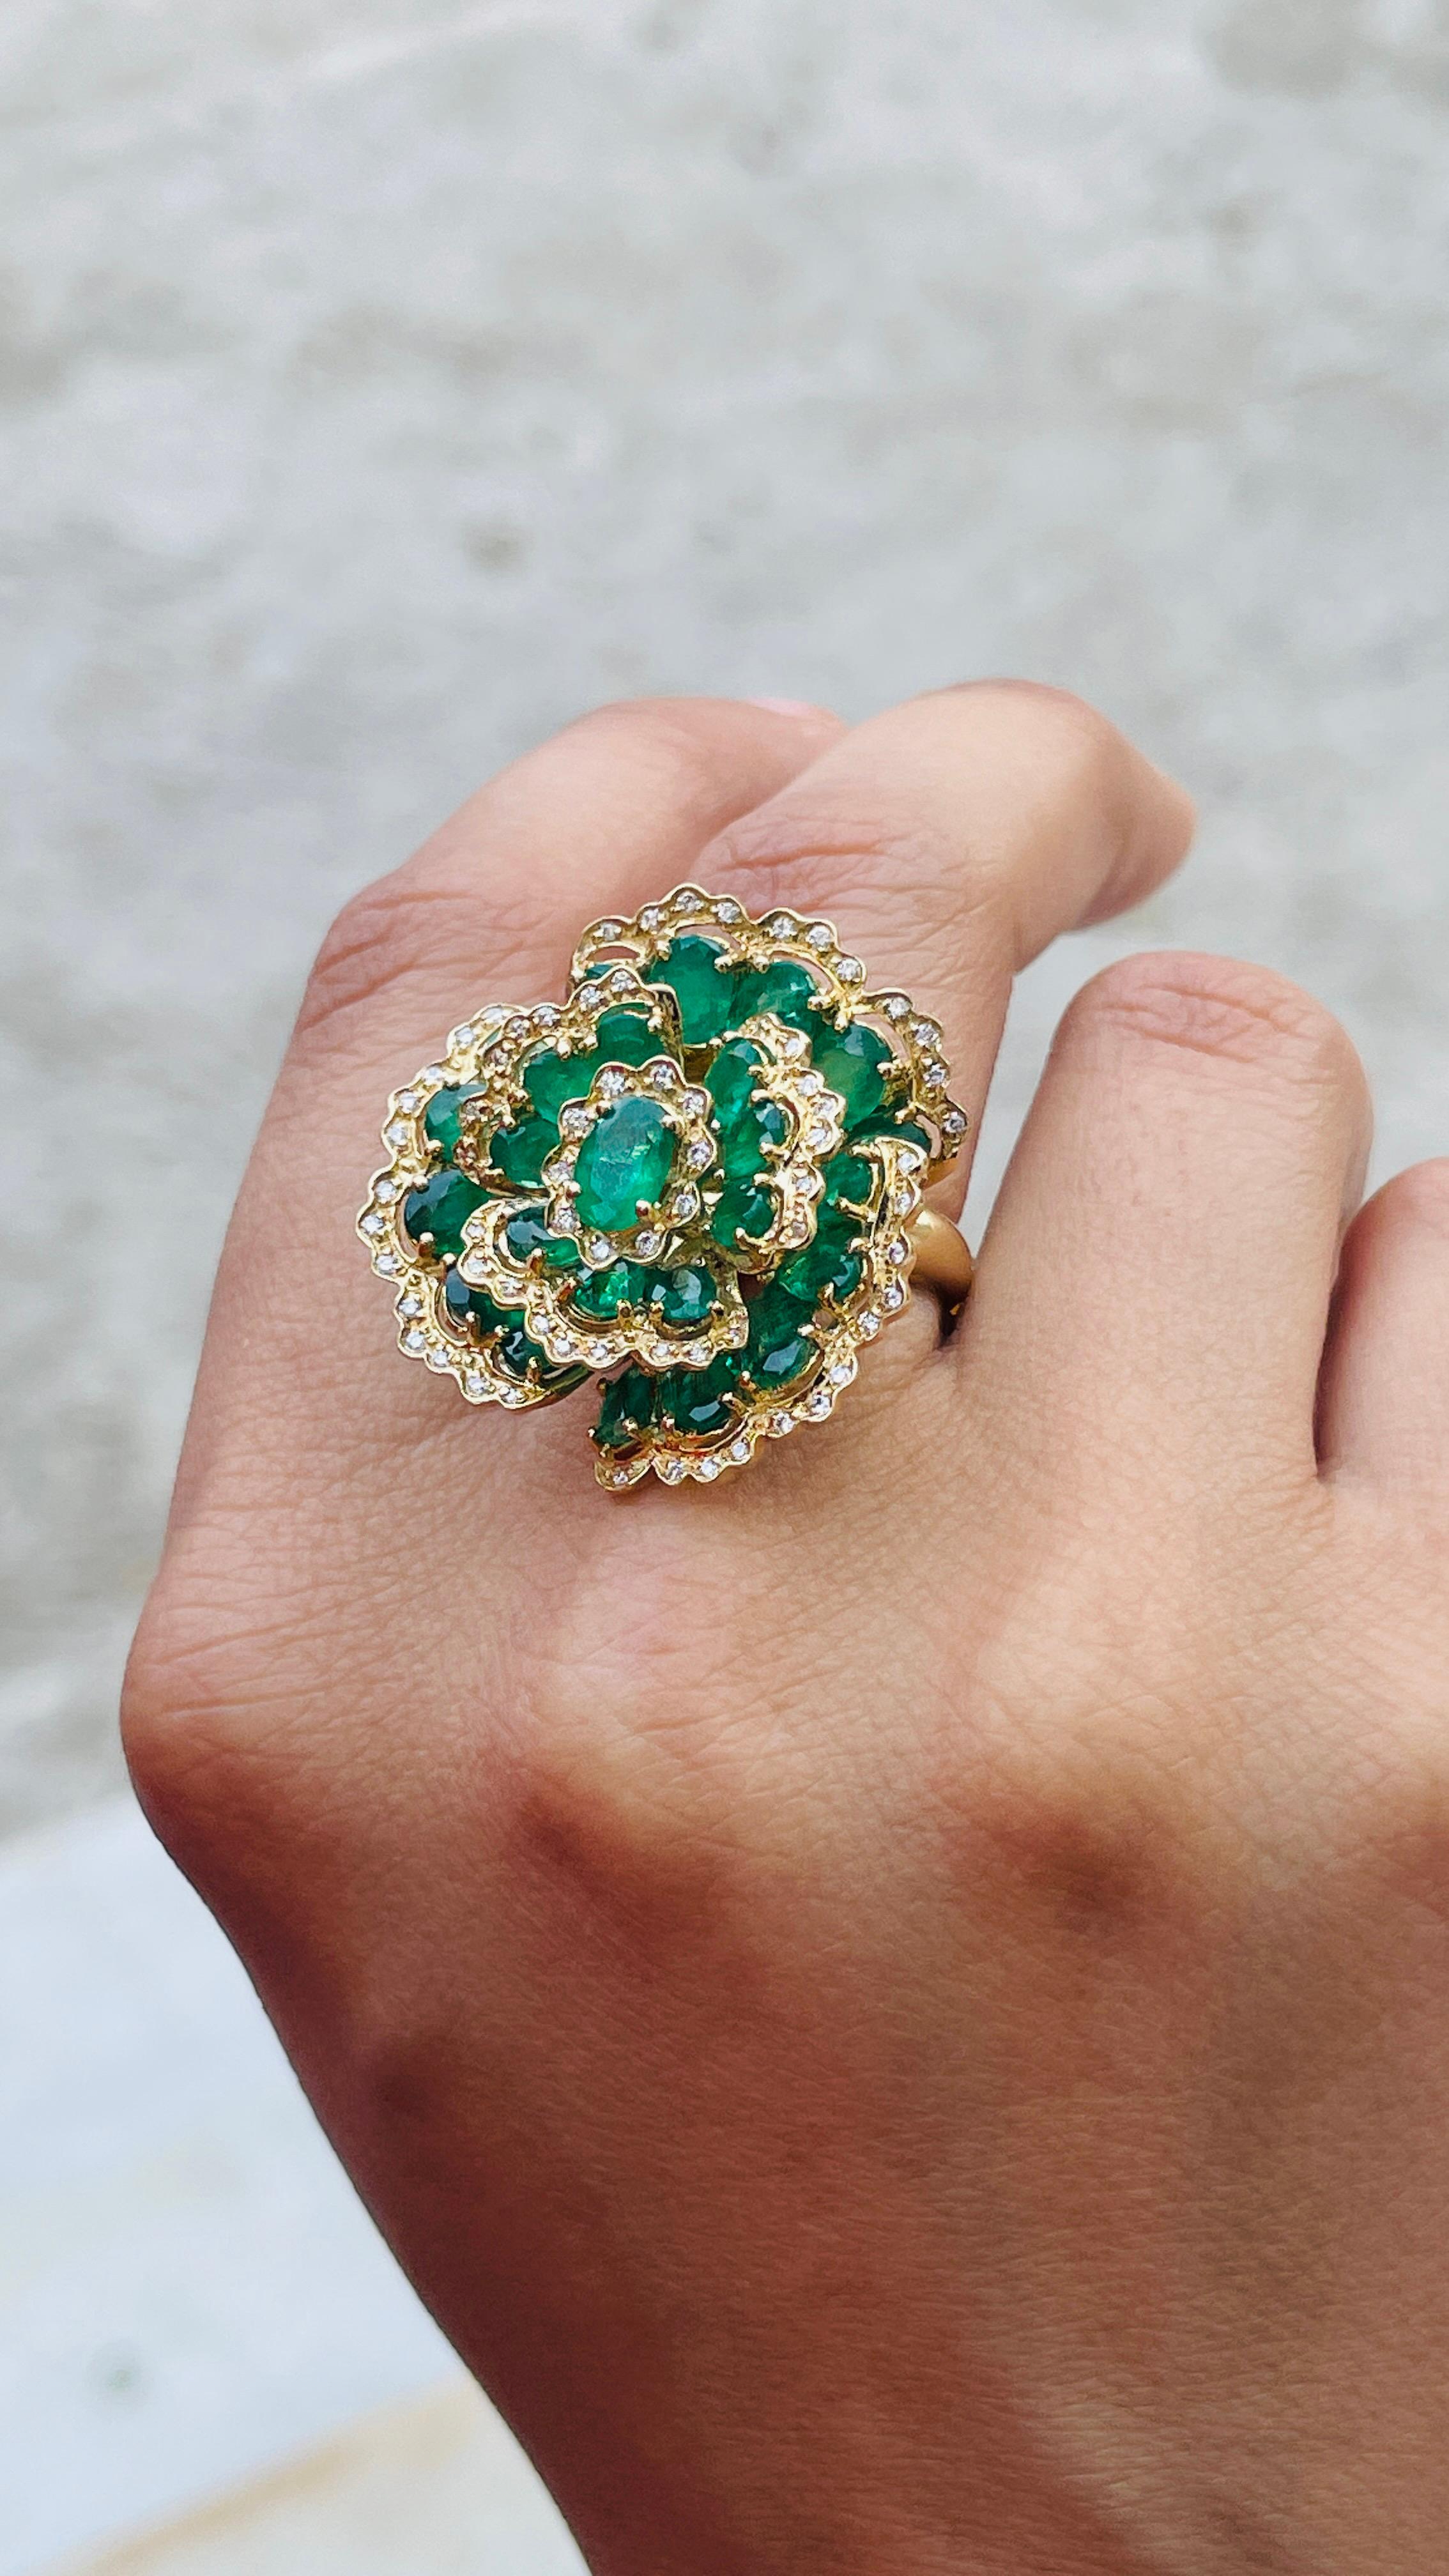 For Sale:  5.82 ct Emerald Flower Ring with Diamonds in 14 Karat Yellow Gold 6